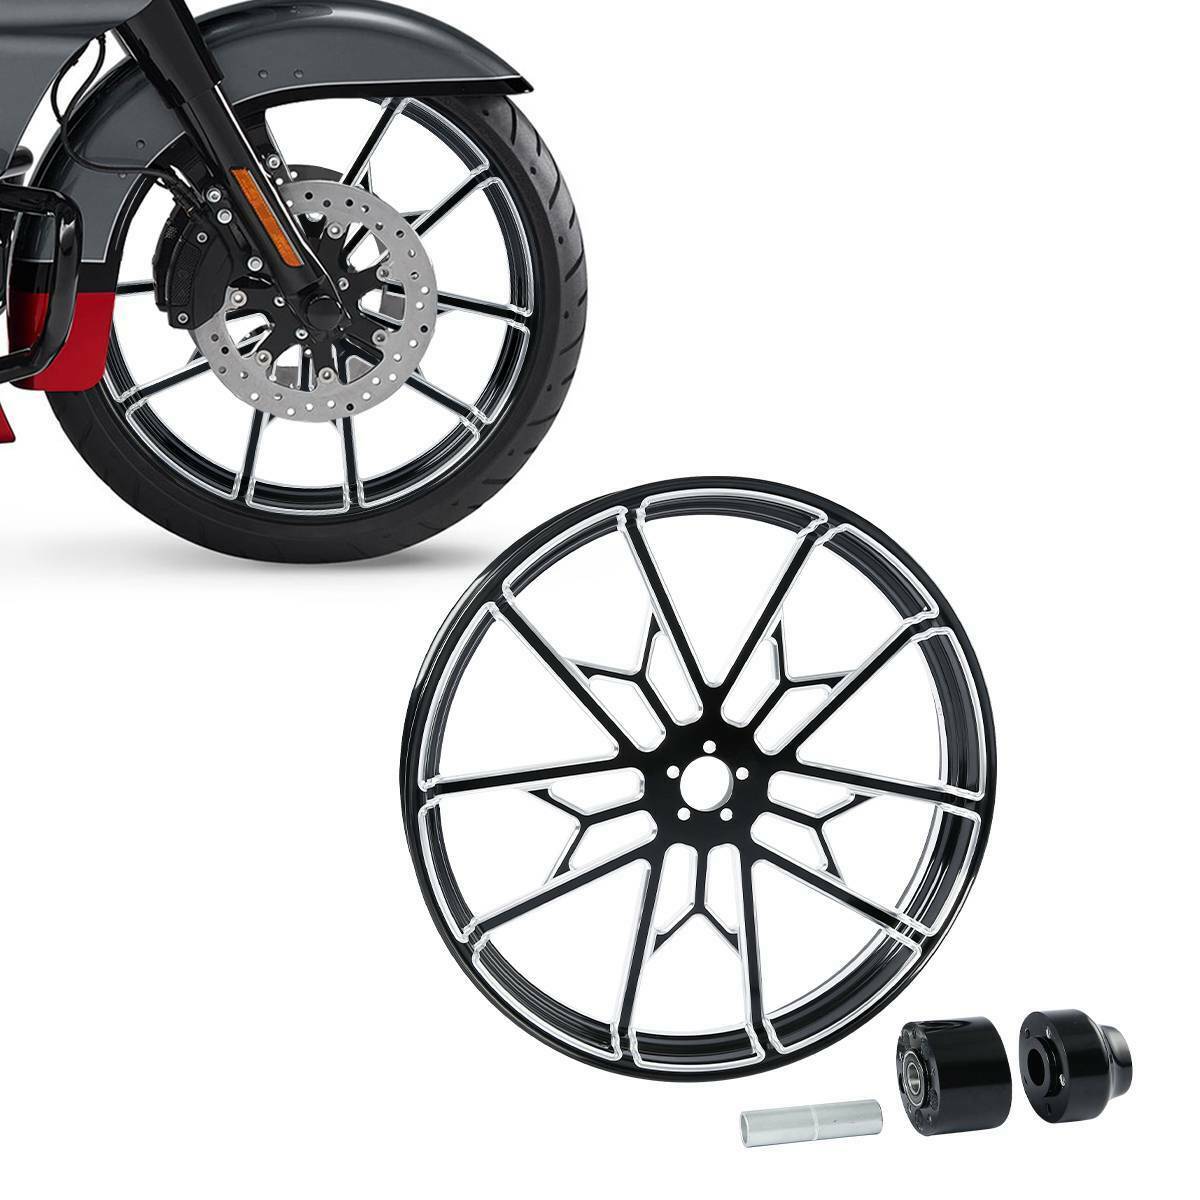 Voodoo Cycle House Custom Front Wheel & Hub Assembly For Harley-Davidson & Custom Applications Touring Road King Street Glide 2008-UP Single Disc 18" 21" 23" 26" 30" inch